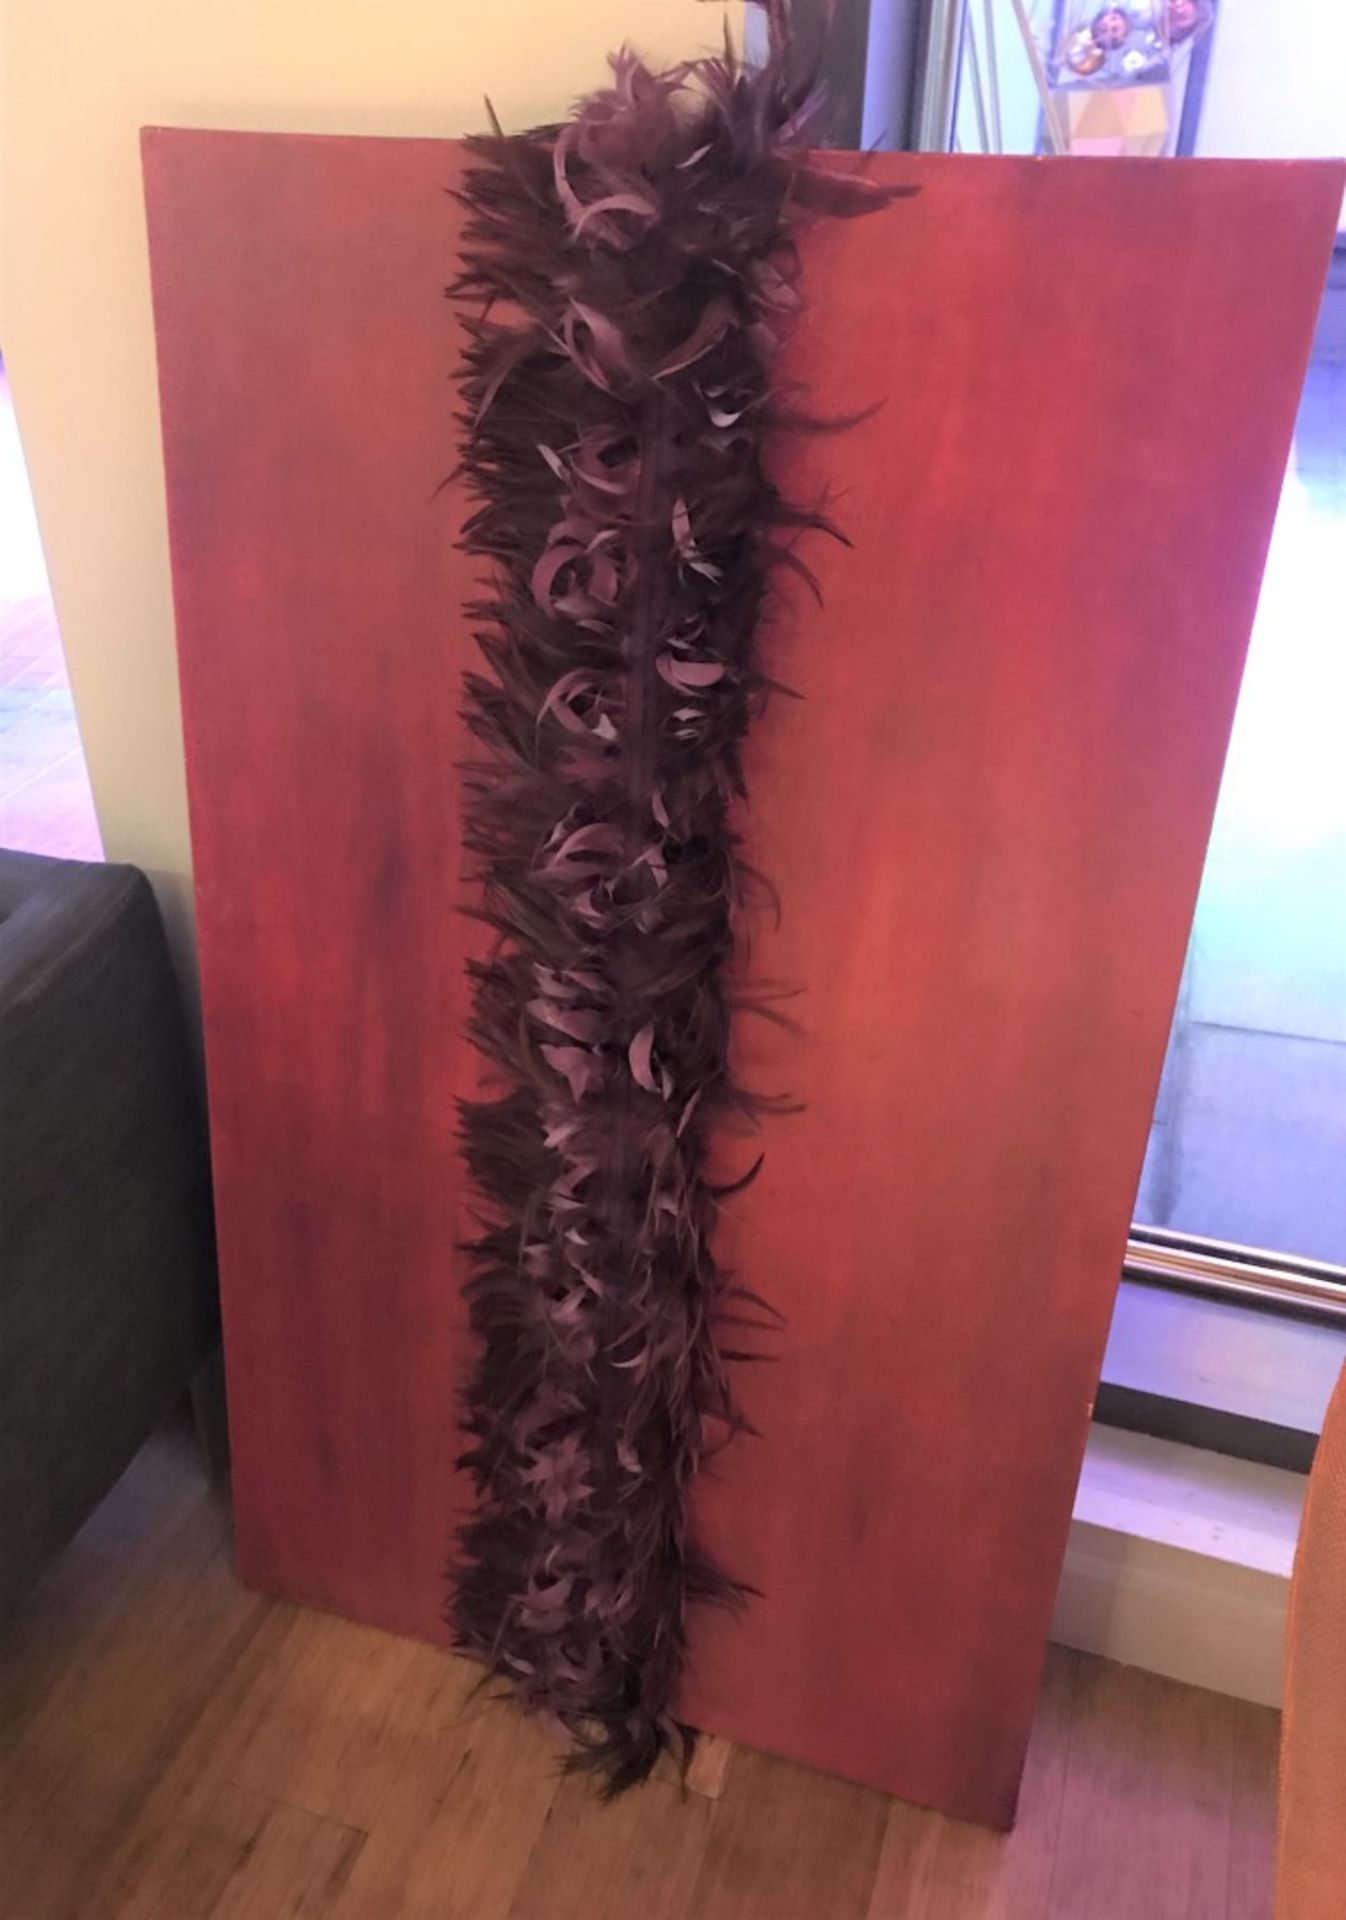 1 x Large Canvas Wall Art Picture With Faux Feather Central Boa - CL587 - Location: London WC2H